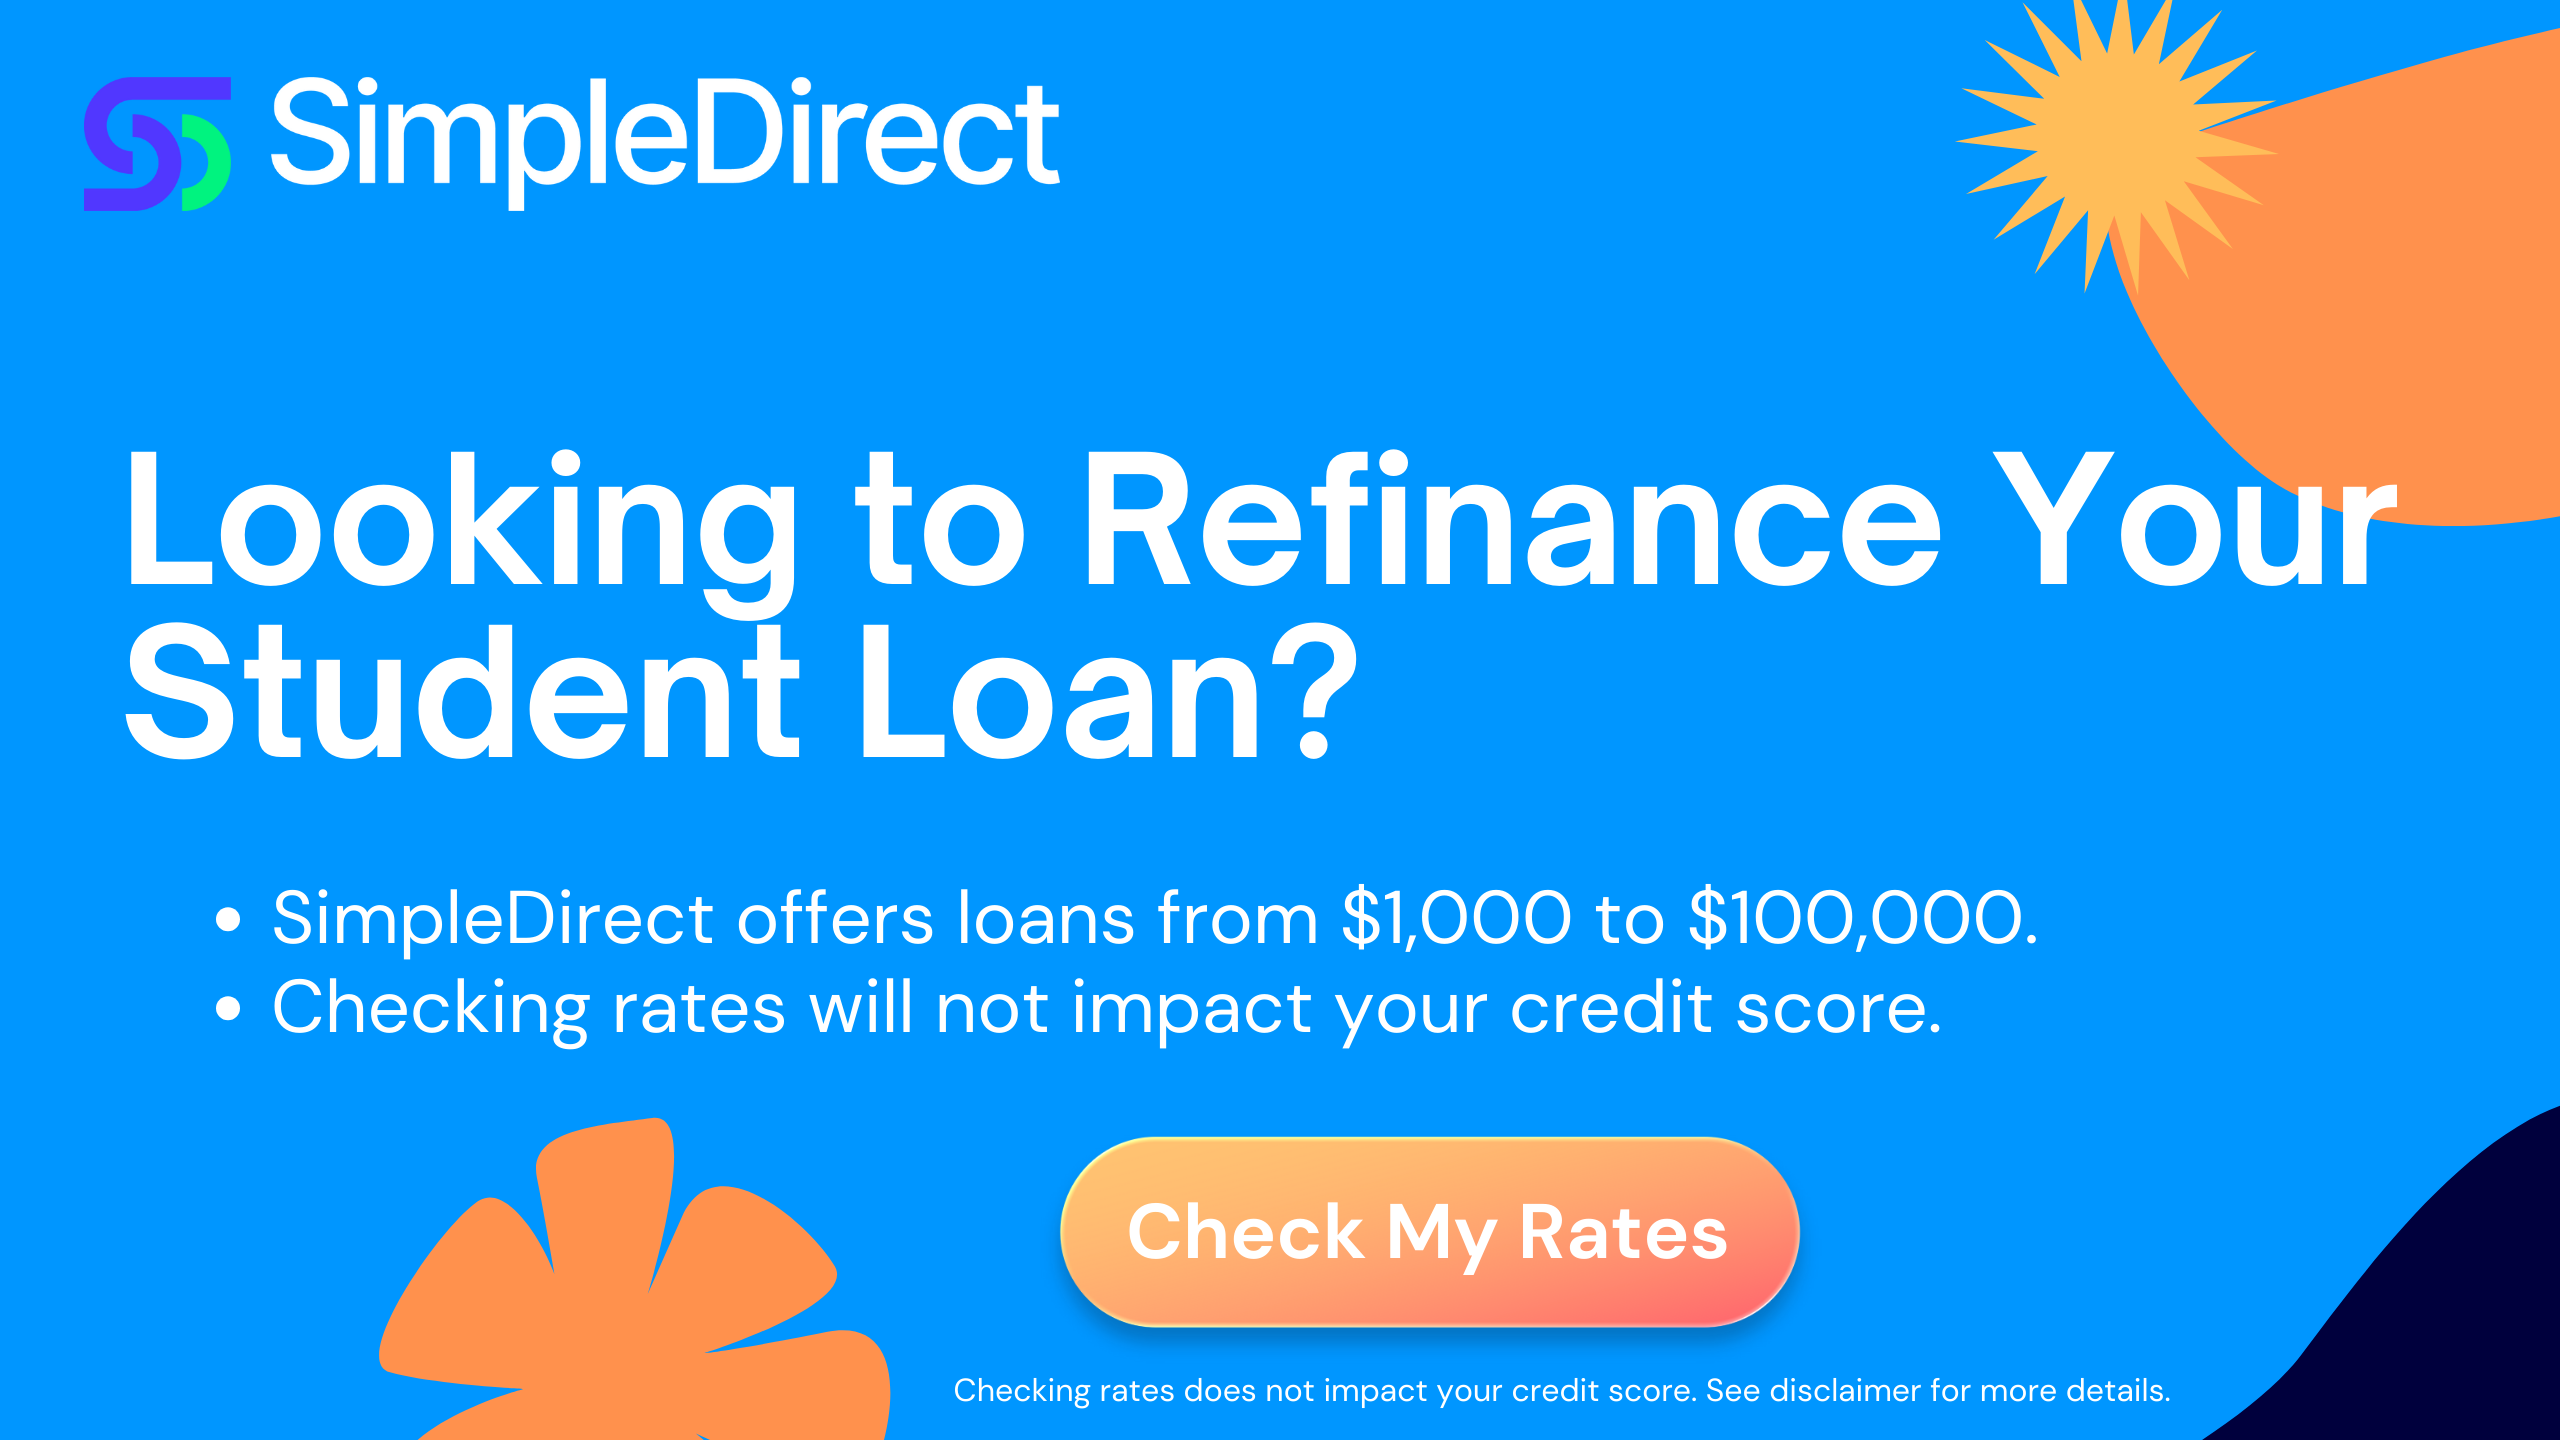 SimpleDirect and its partners can help students refinance student loans effectively.